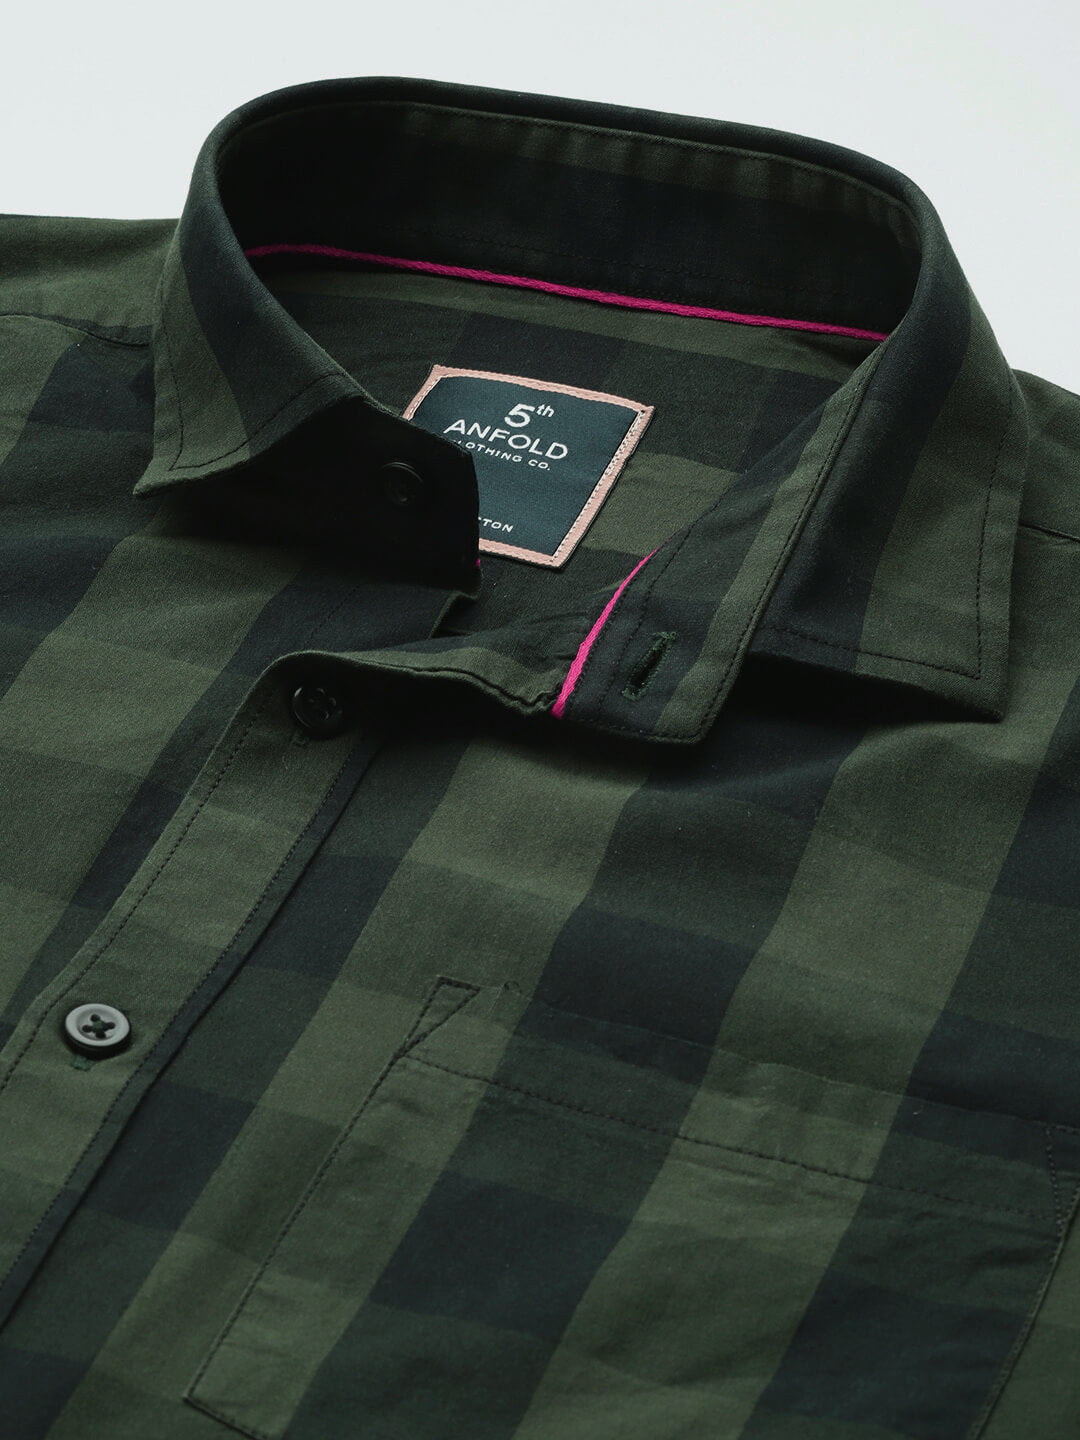 5thanfold Men's Casual Pure Cotton Full Sleeve Checkered Green Slim Fit Shirt